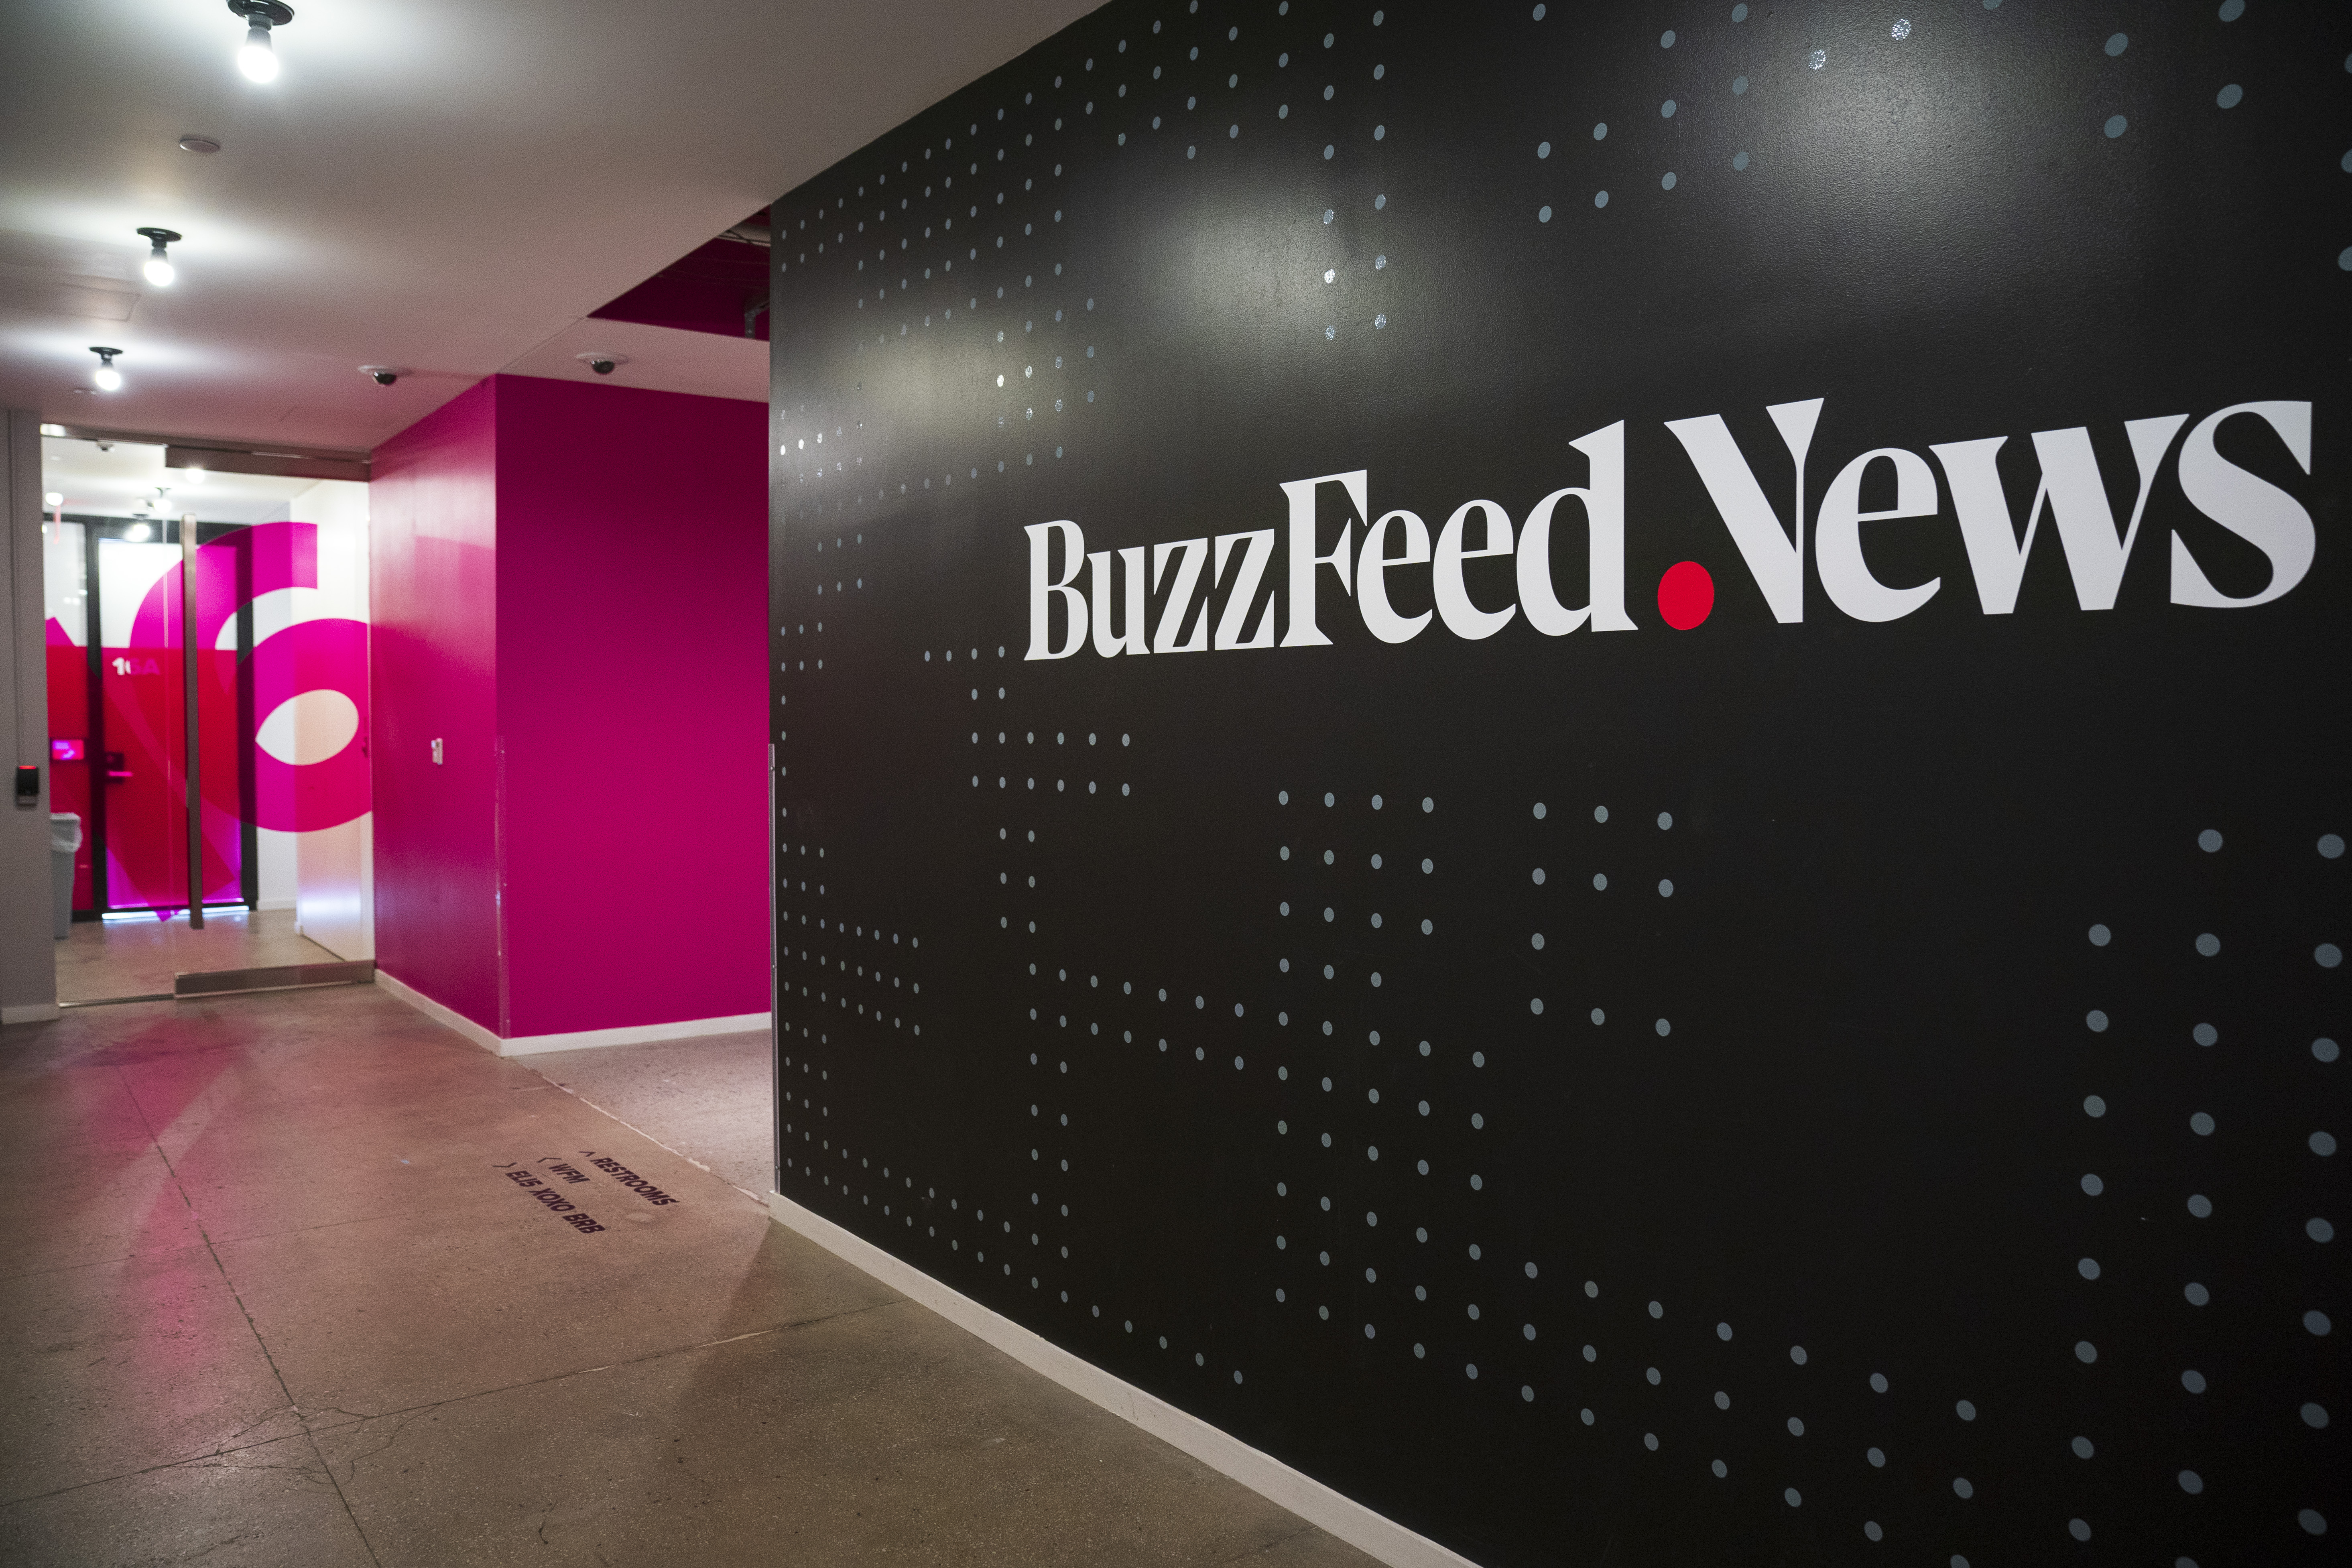 A BuzzFeed News logo adorns a wall inside BuzzFeed headquarters, December 11, 2018 in New York City. (Drew Angerer/Getty Images)